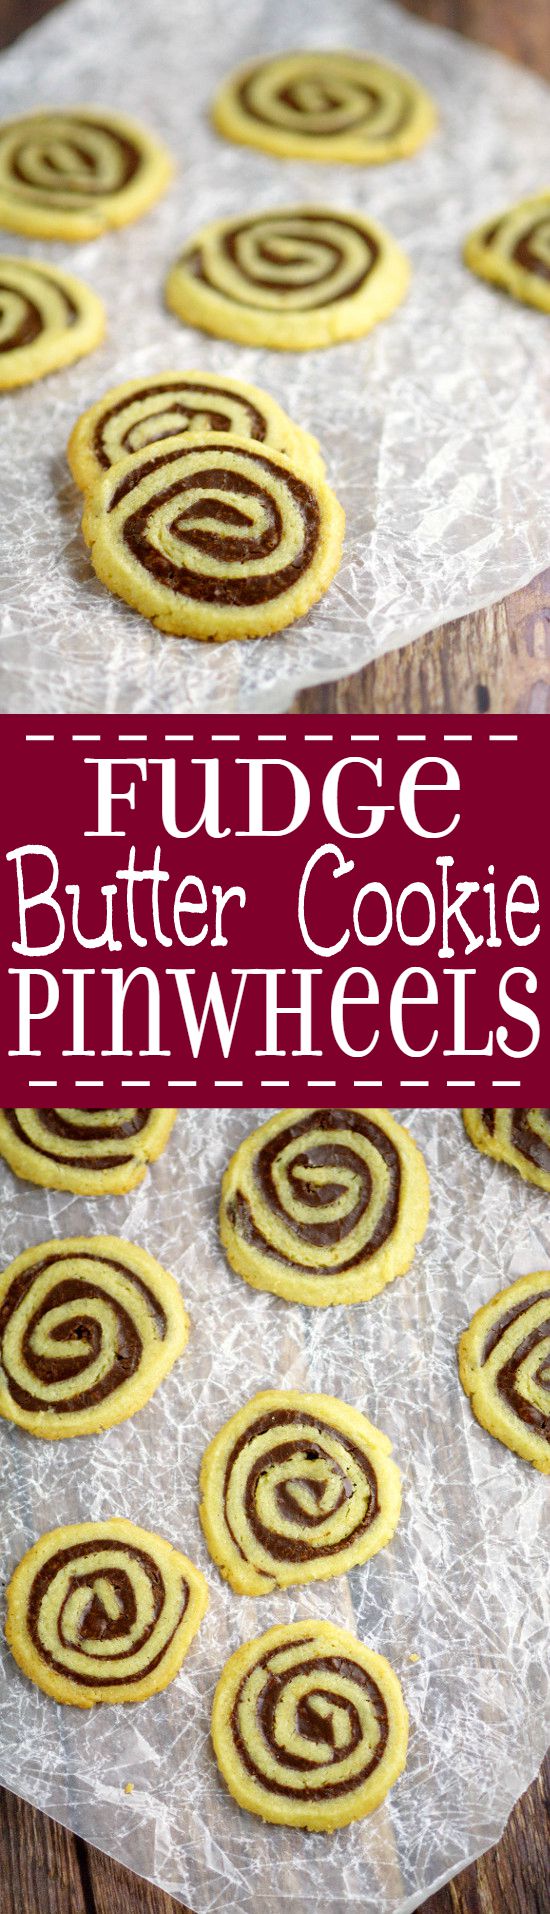 Fudge Butter Cookie Pinwheels Recipe are delicious homemade cookies recipe made with fudge and butter cookie dough! I make these every year for Christmas cookies! They're seriously like cookie crack! 